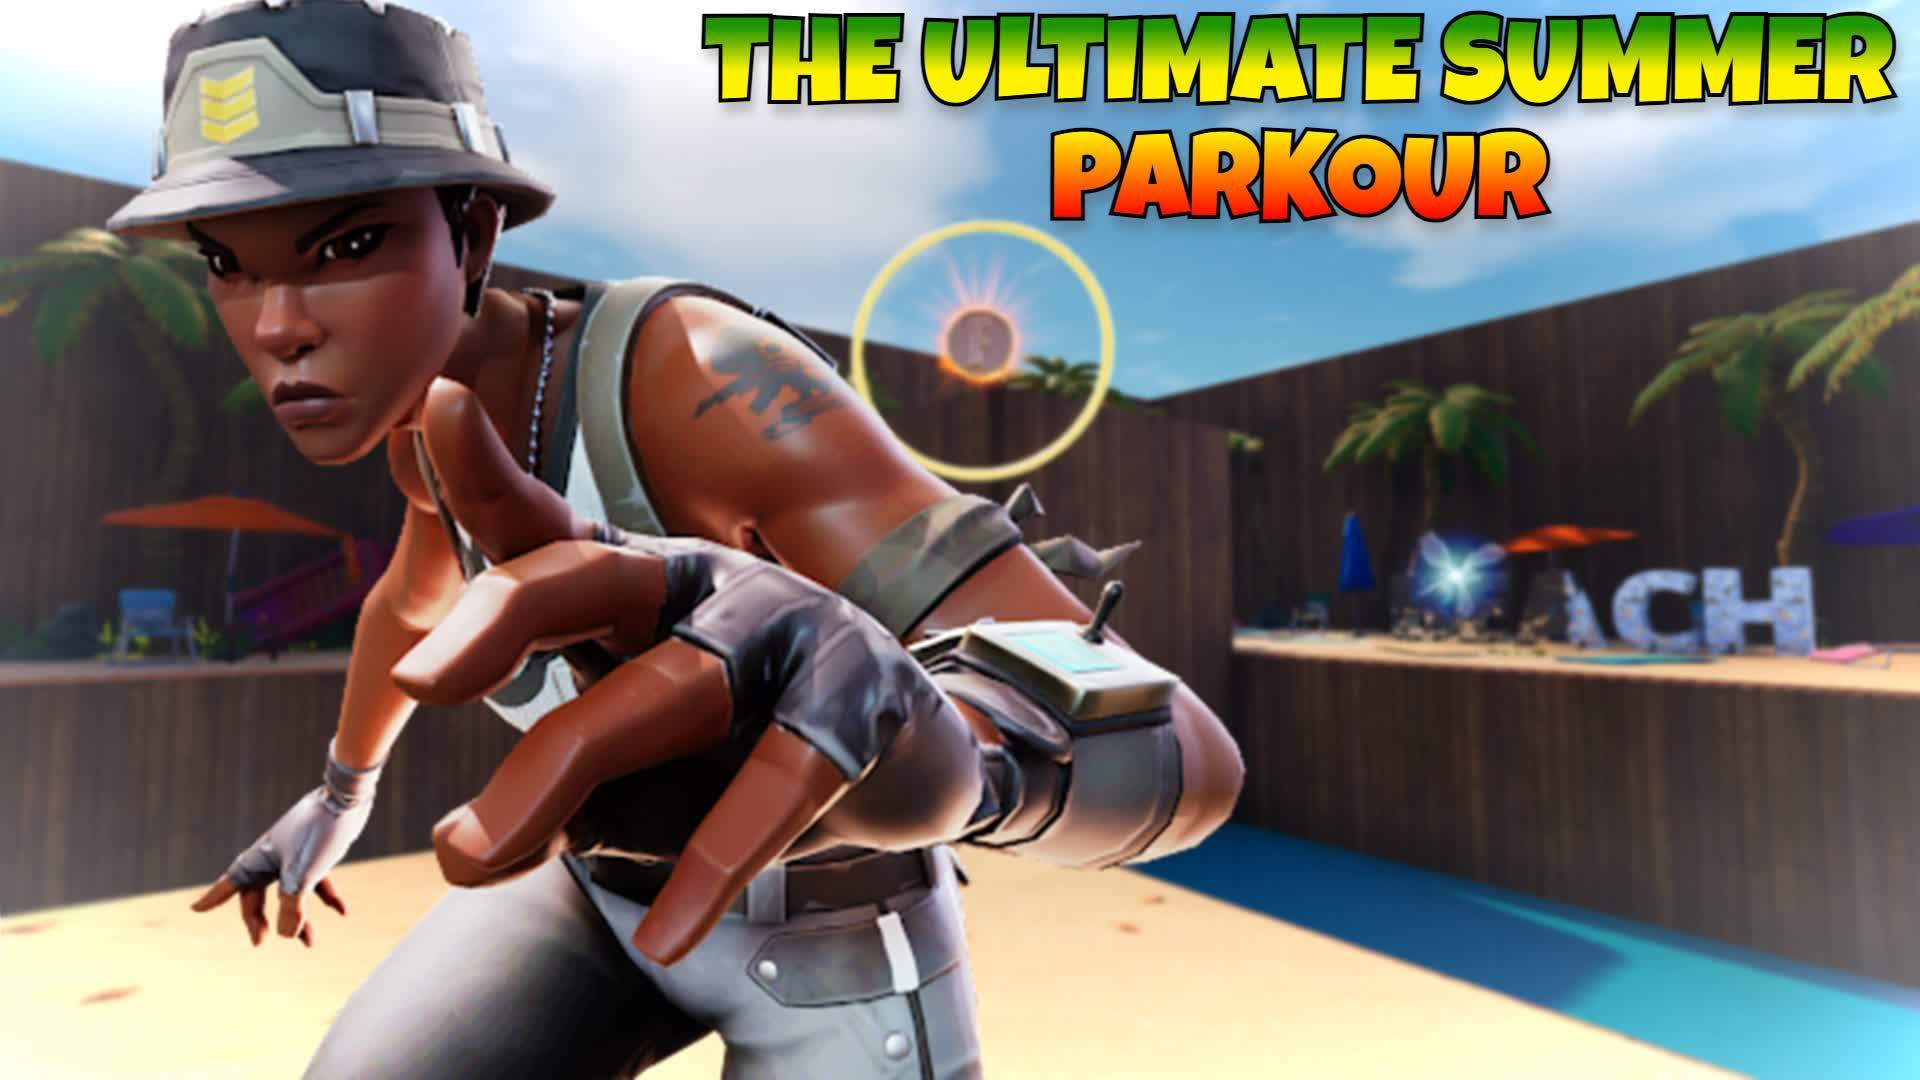 THE ULTIMATE SUMMER PARKOUR!